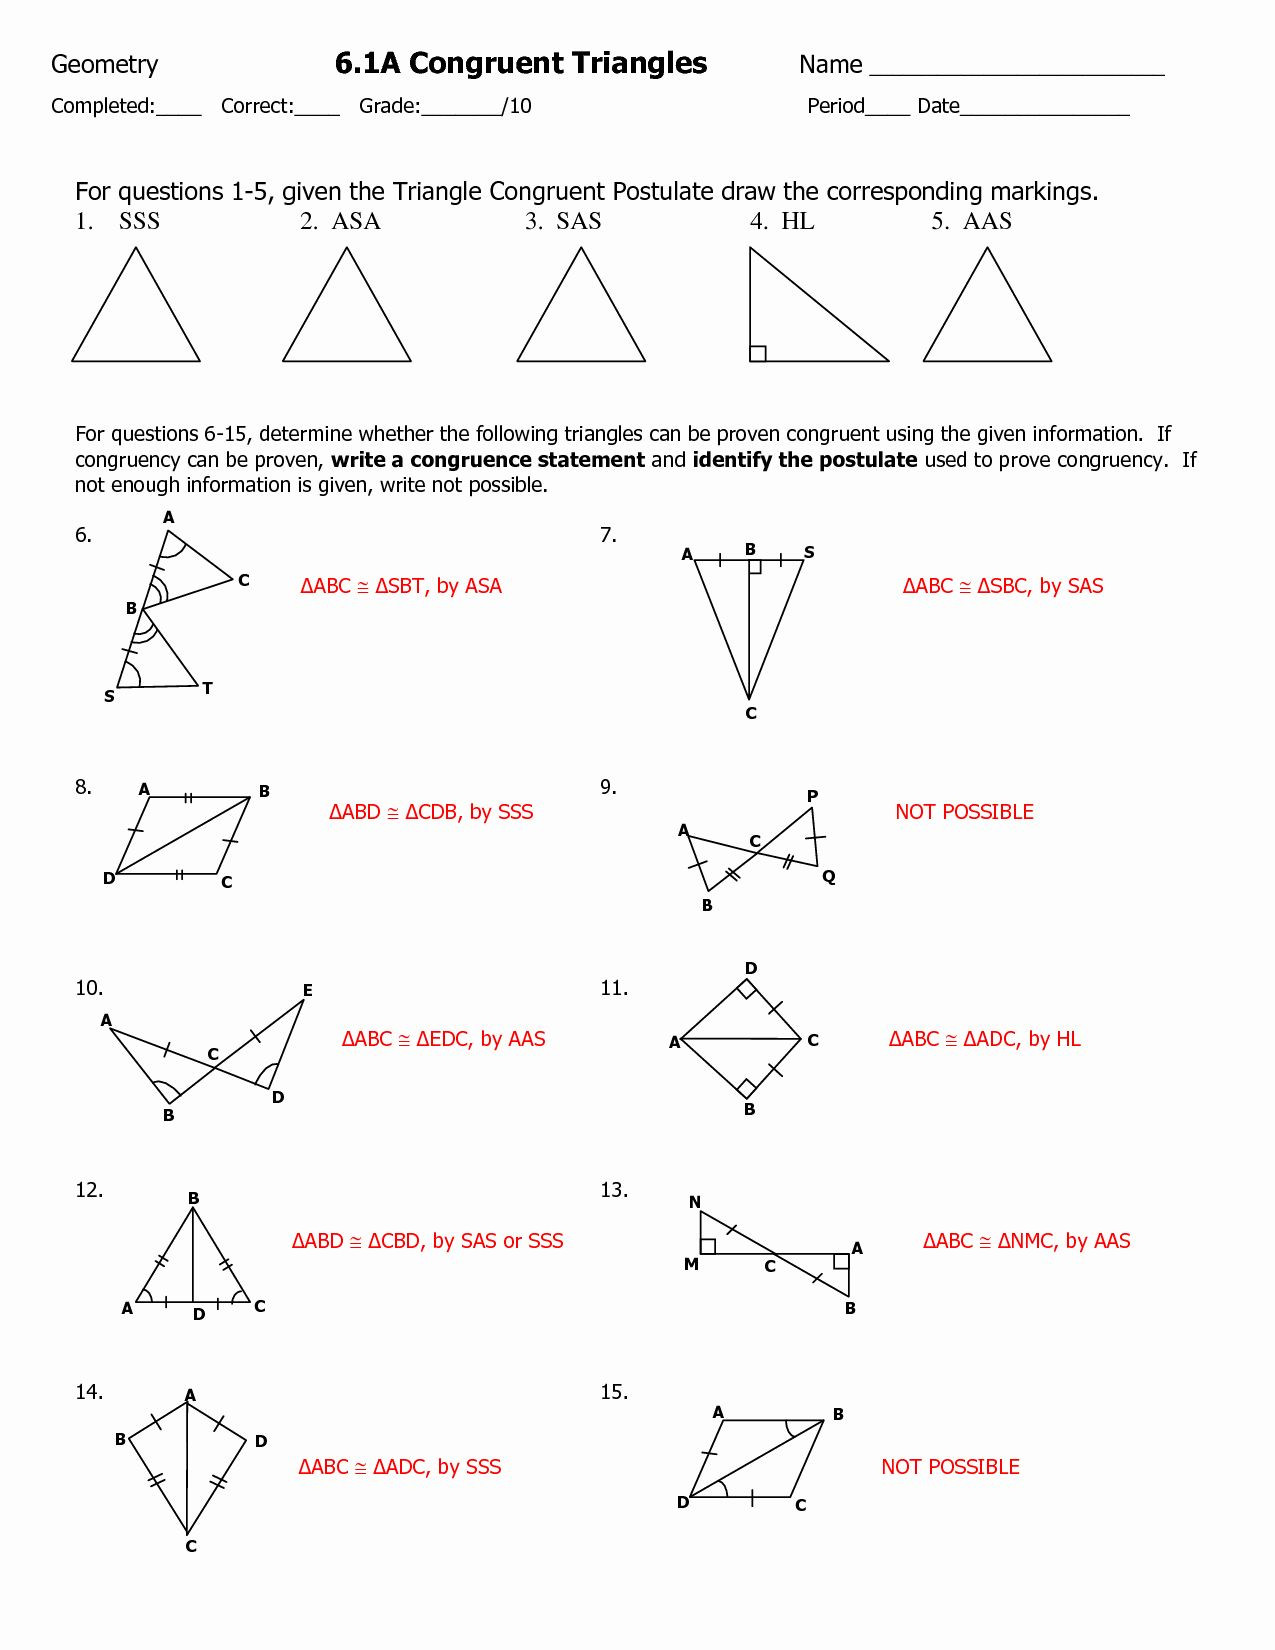 Congruent Triangles Worksheet with Answers 50 Congruent Triangles Worksheet with Answer In 2020 with